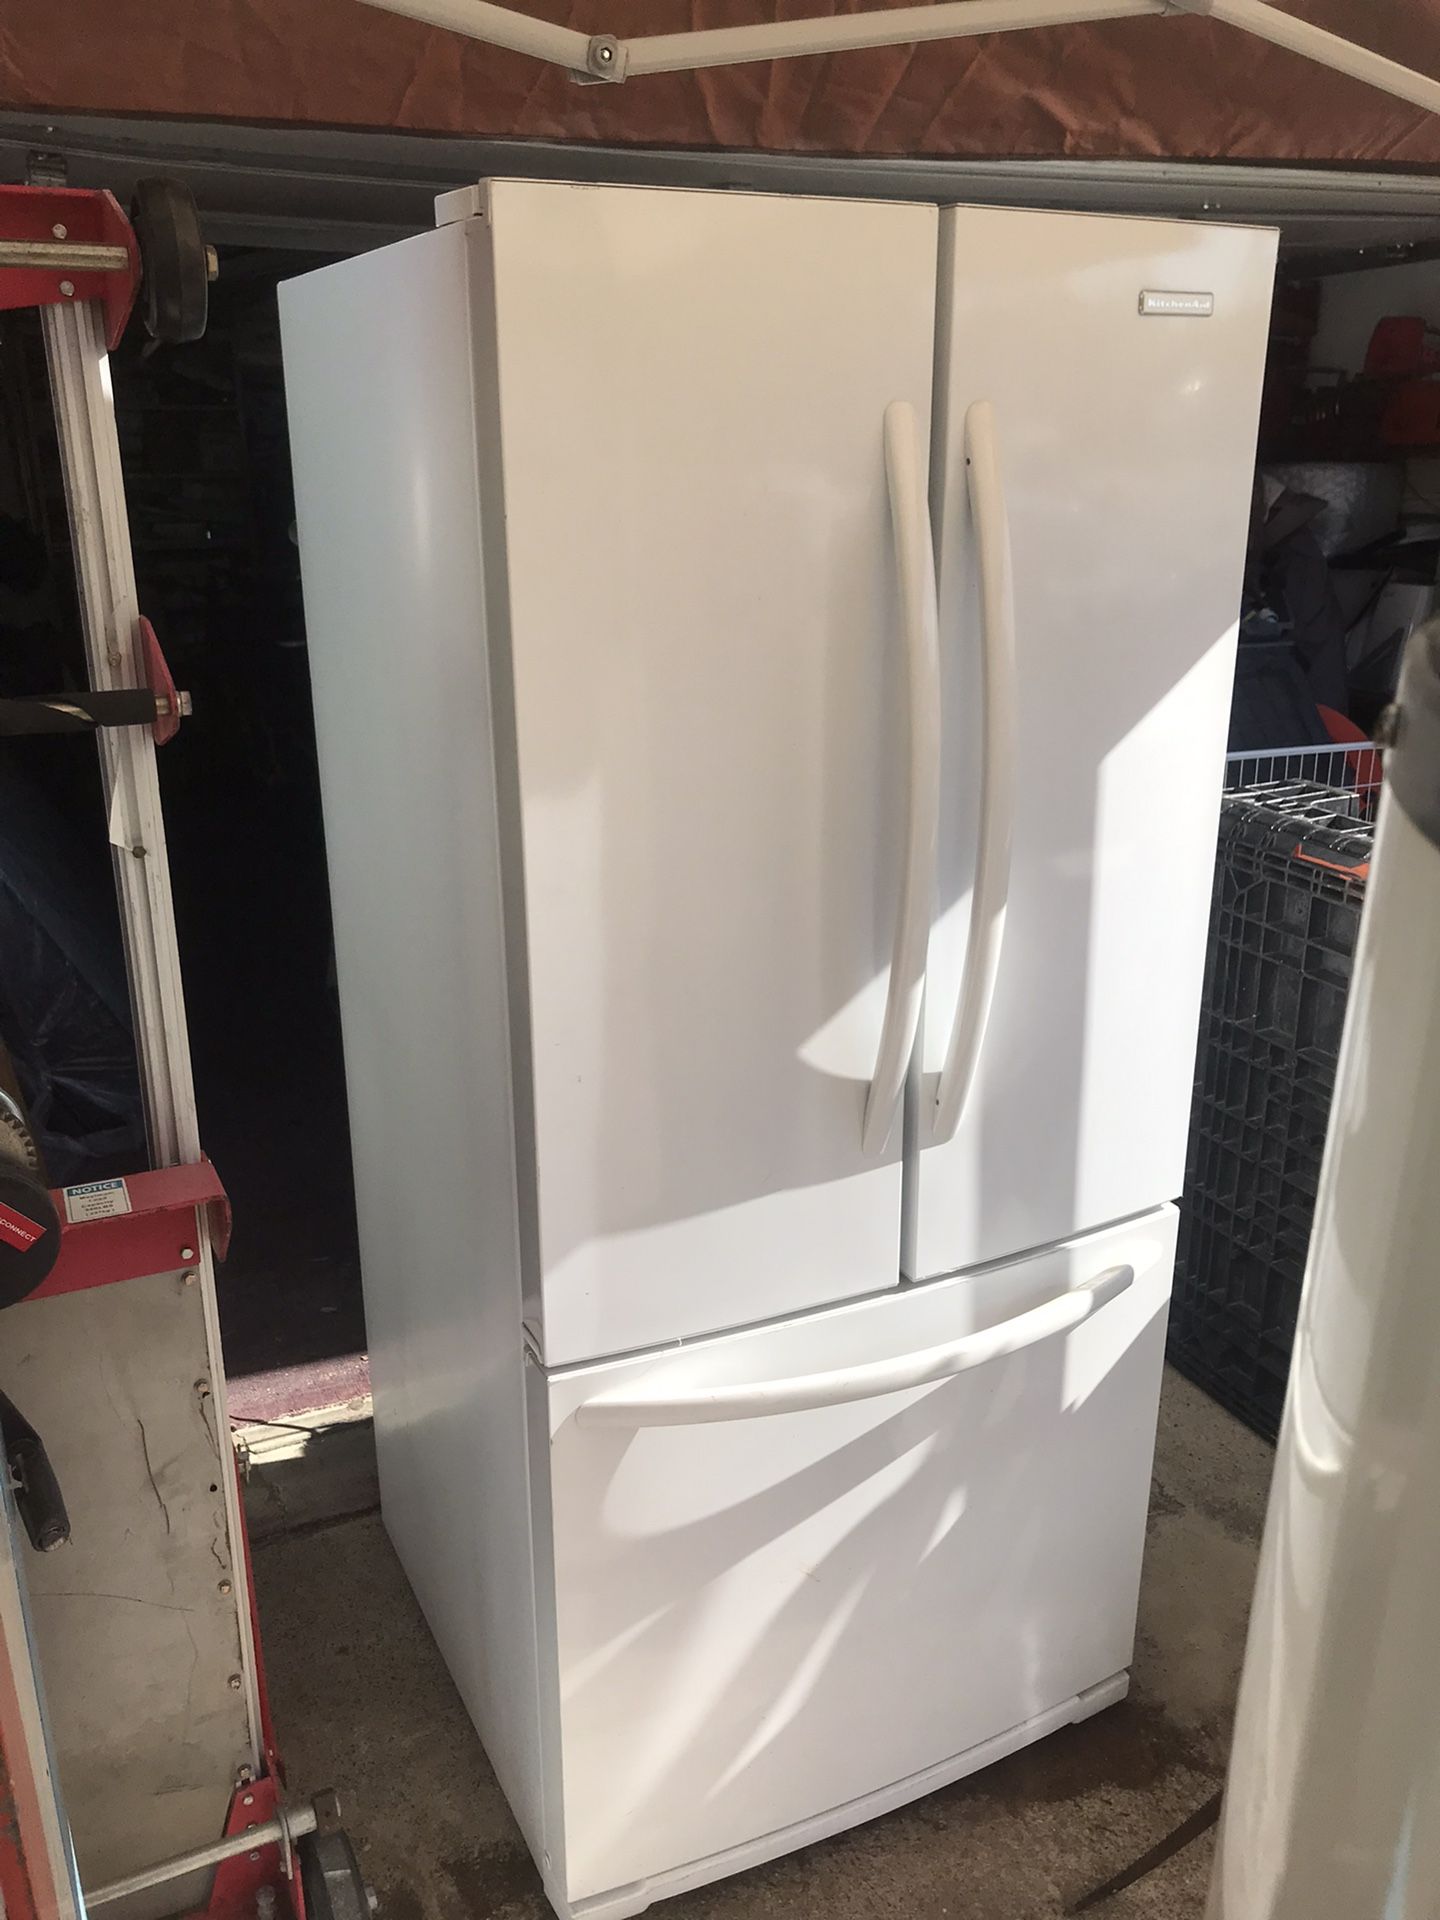 KitchenAid refrigerator side-by-side with bottom freezer and icemaker